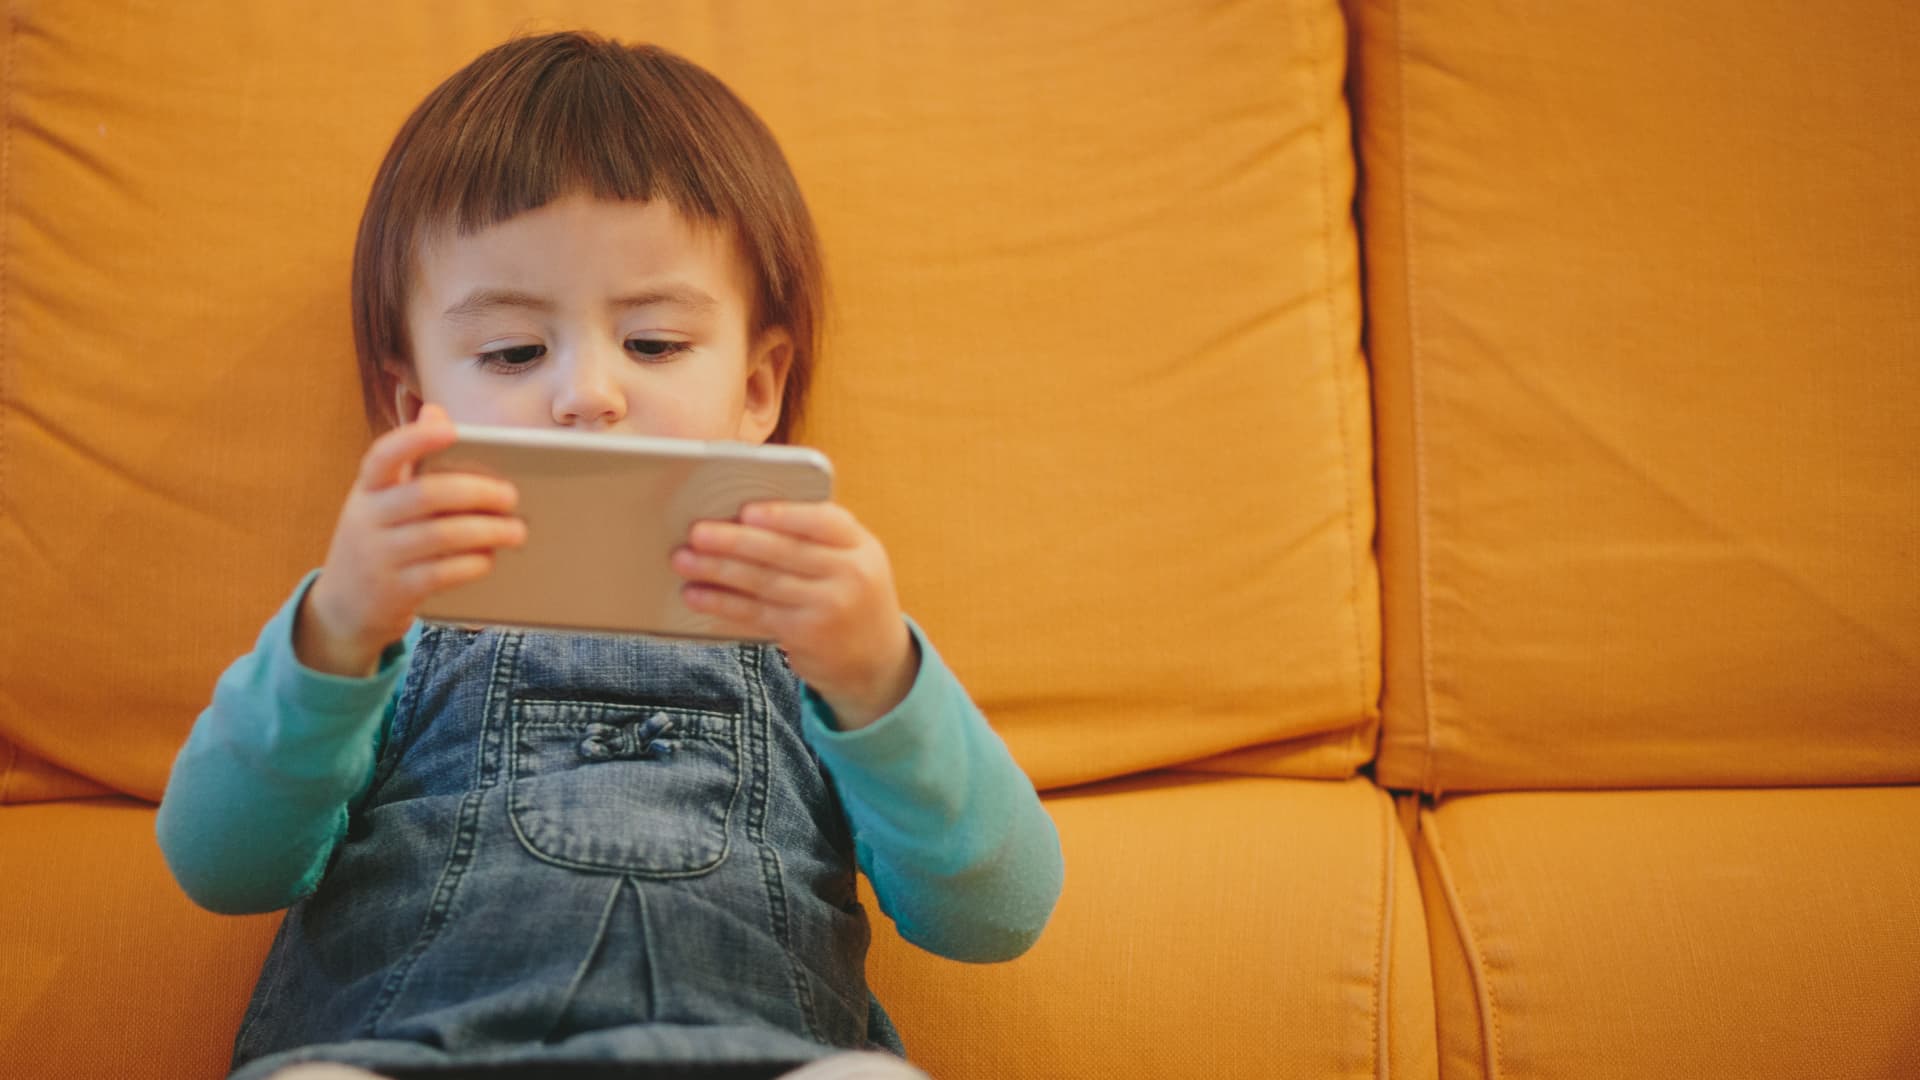 Parents of successful kids don't worry about screen time, expert says—they teach these 3 skills instead